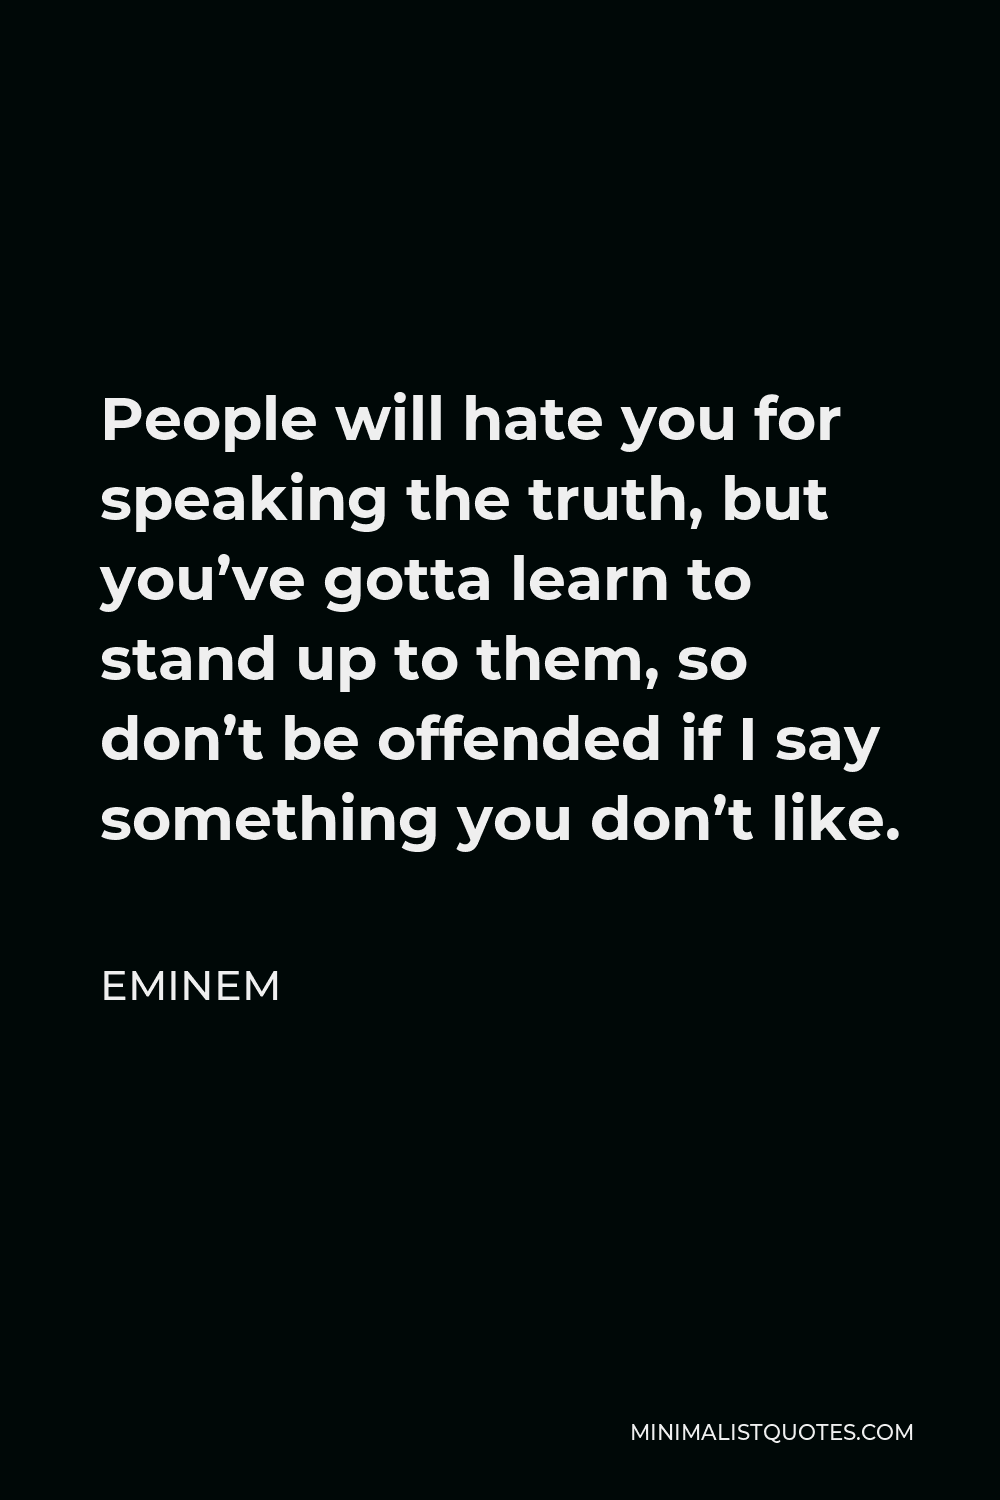 Eminem Quote People Will Hate You For Speaking The Truth But You Ve Gotta Learn To Stand Up To